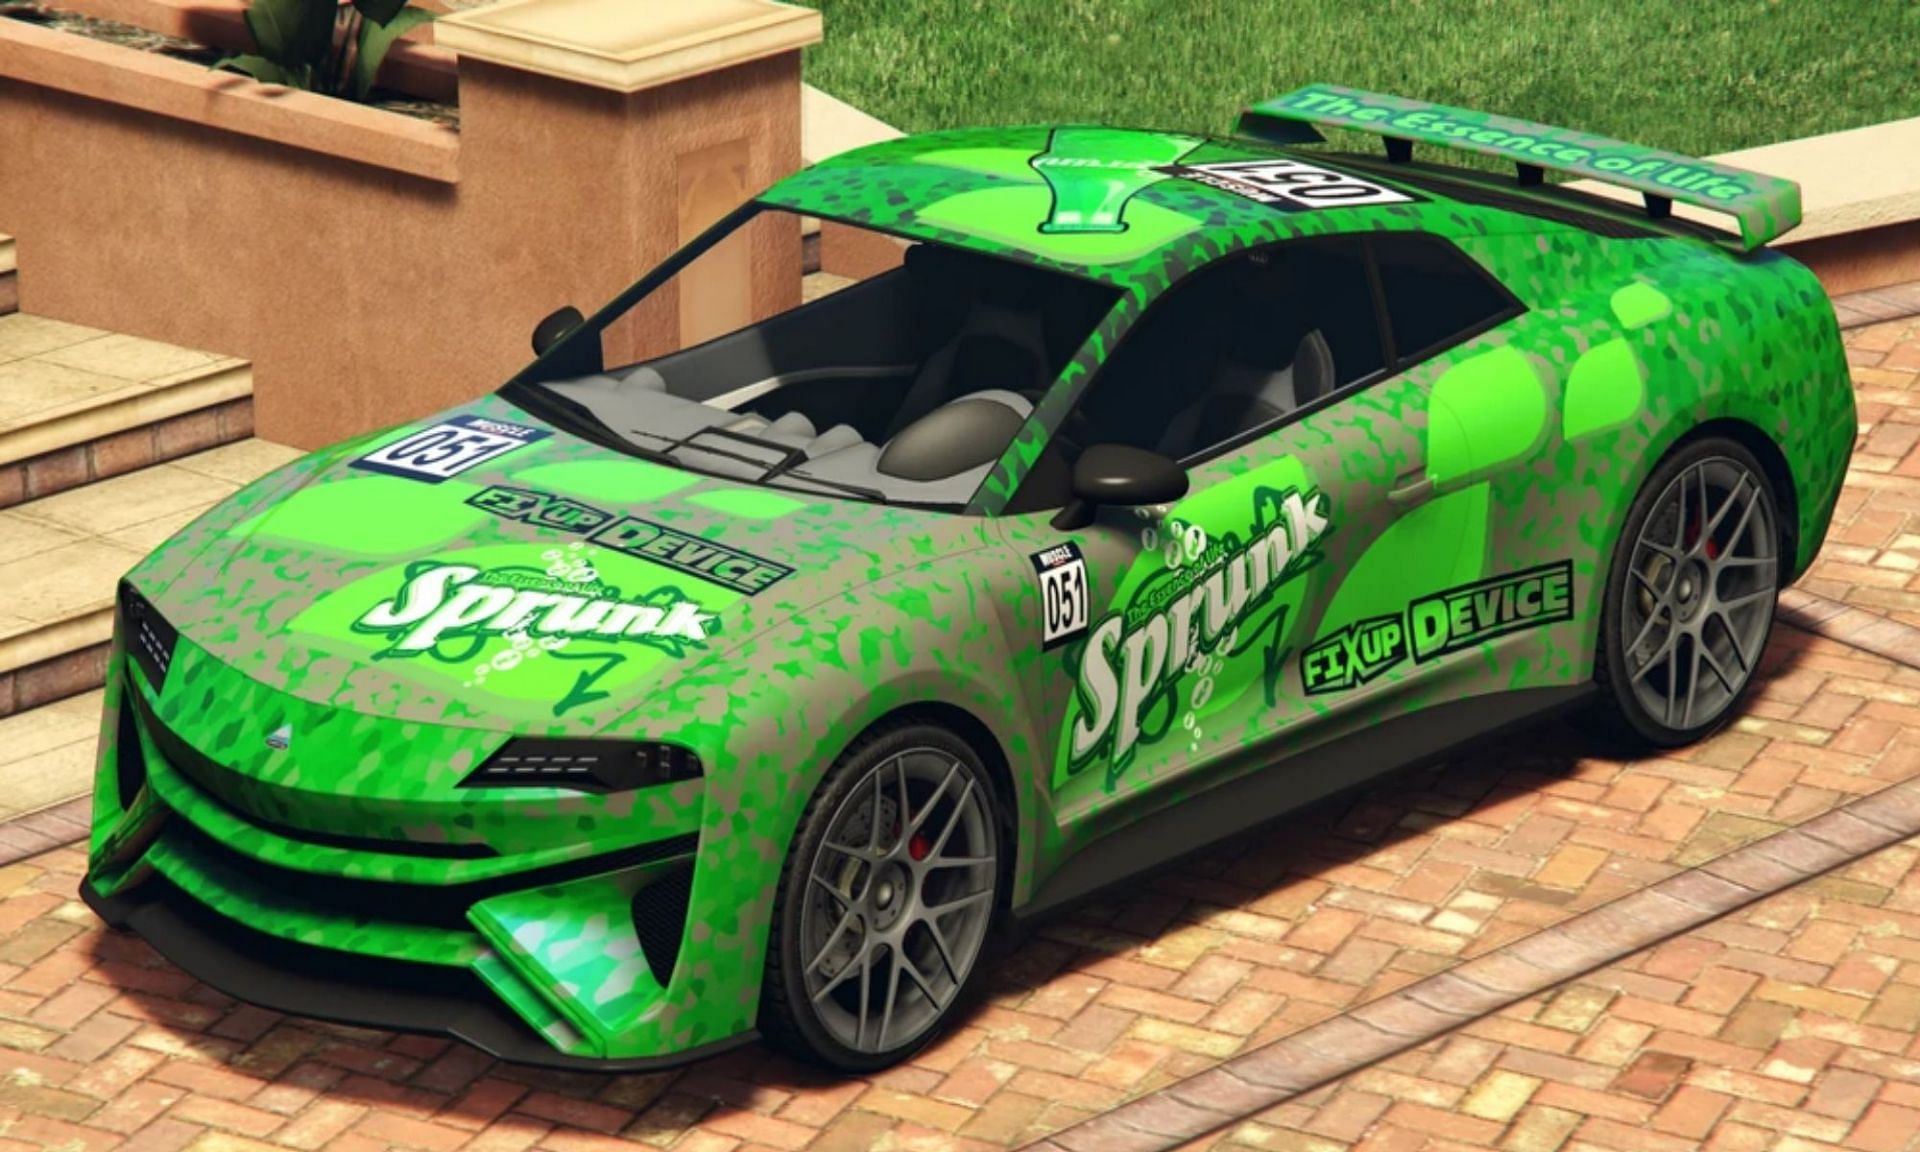 The Overflod Imorgon is an electric vehicle in GTA Online (Image via Rockstar Games)